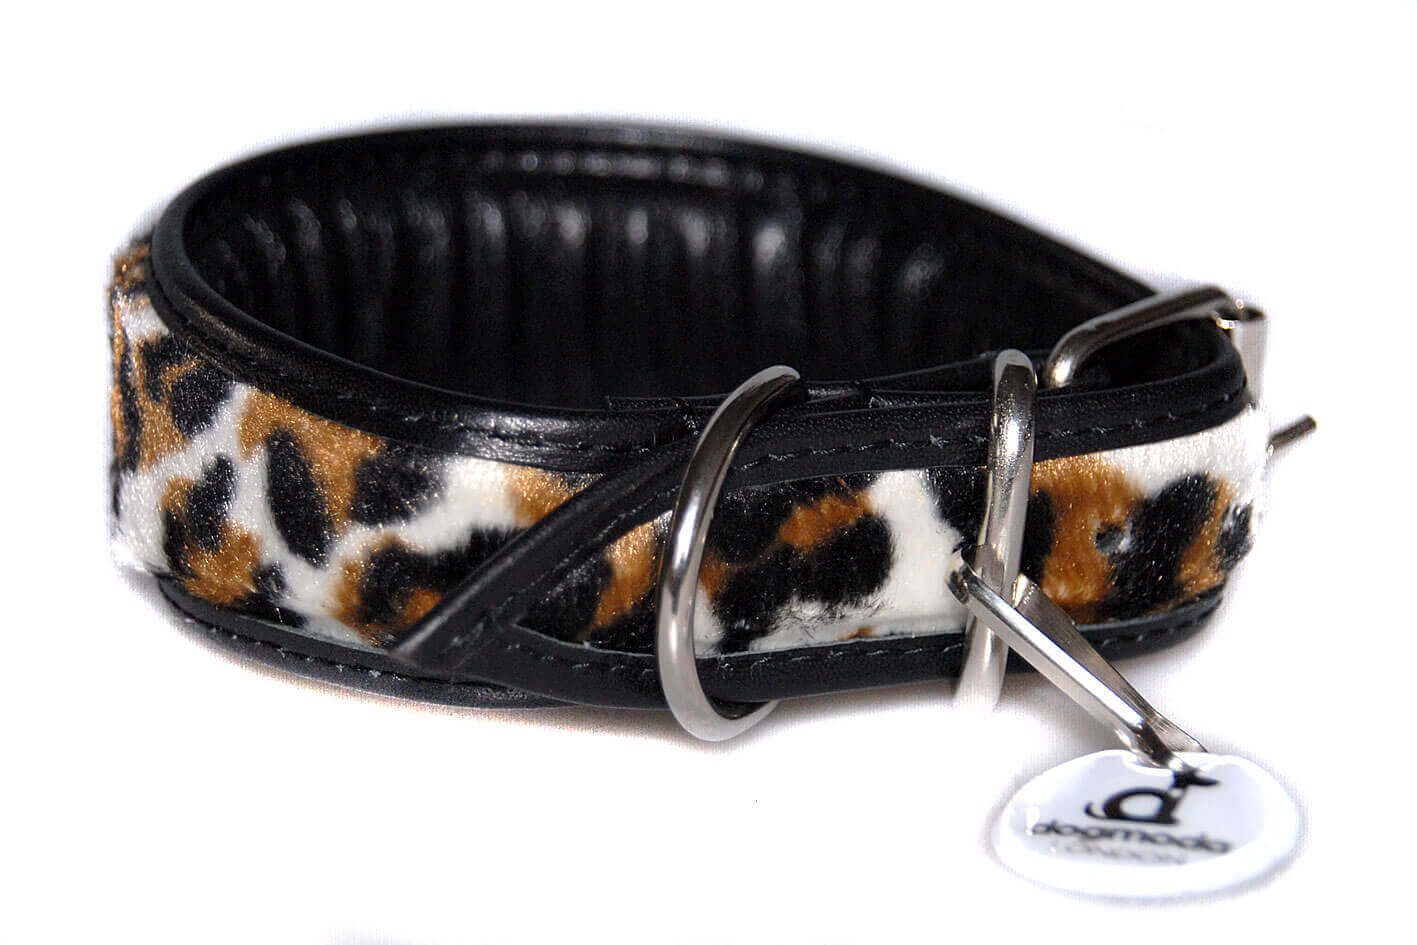 All our collars are fully lined and padded for extra comfort